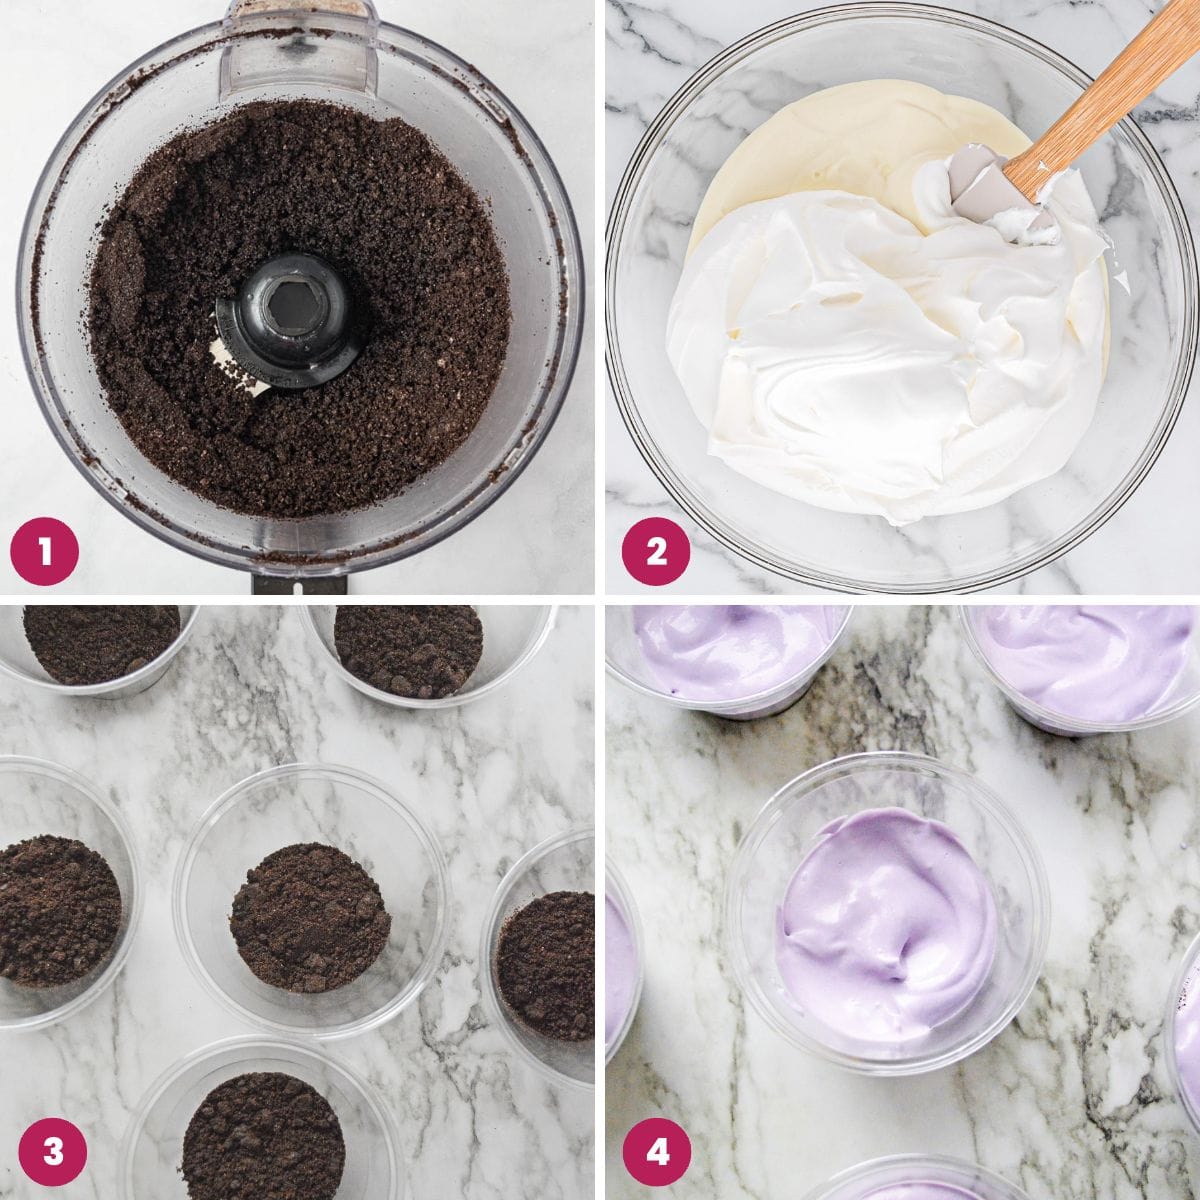 Collage of 4 images showing how to make dirt cups